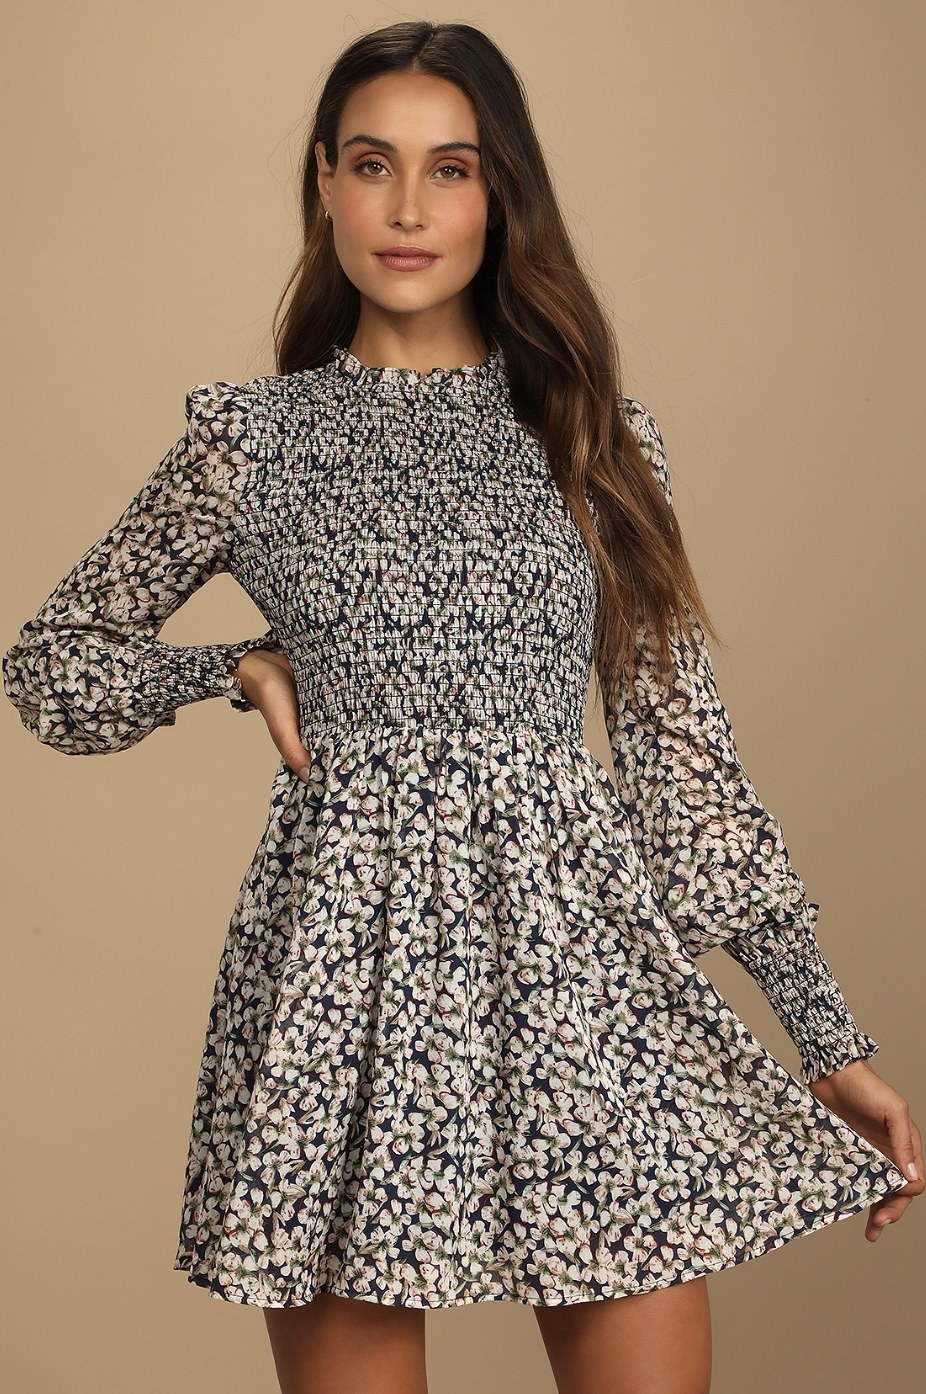 Model in the blue and white floral print dress